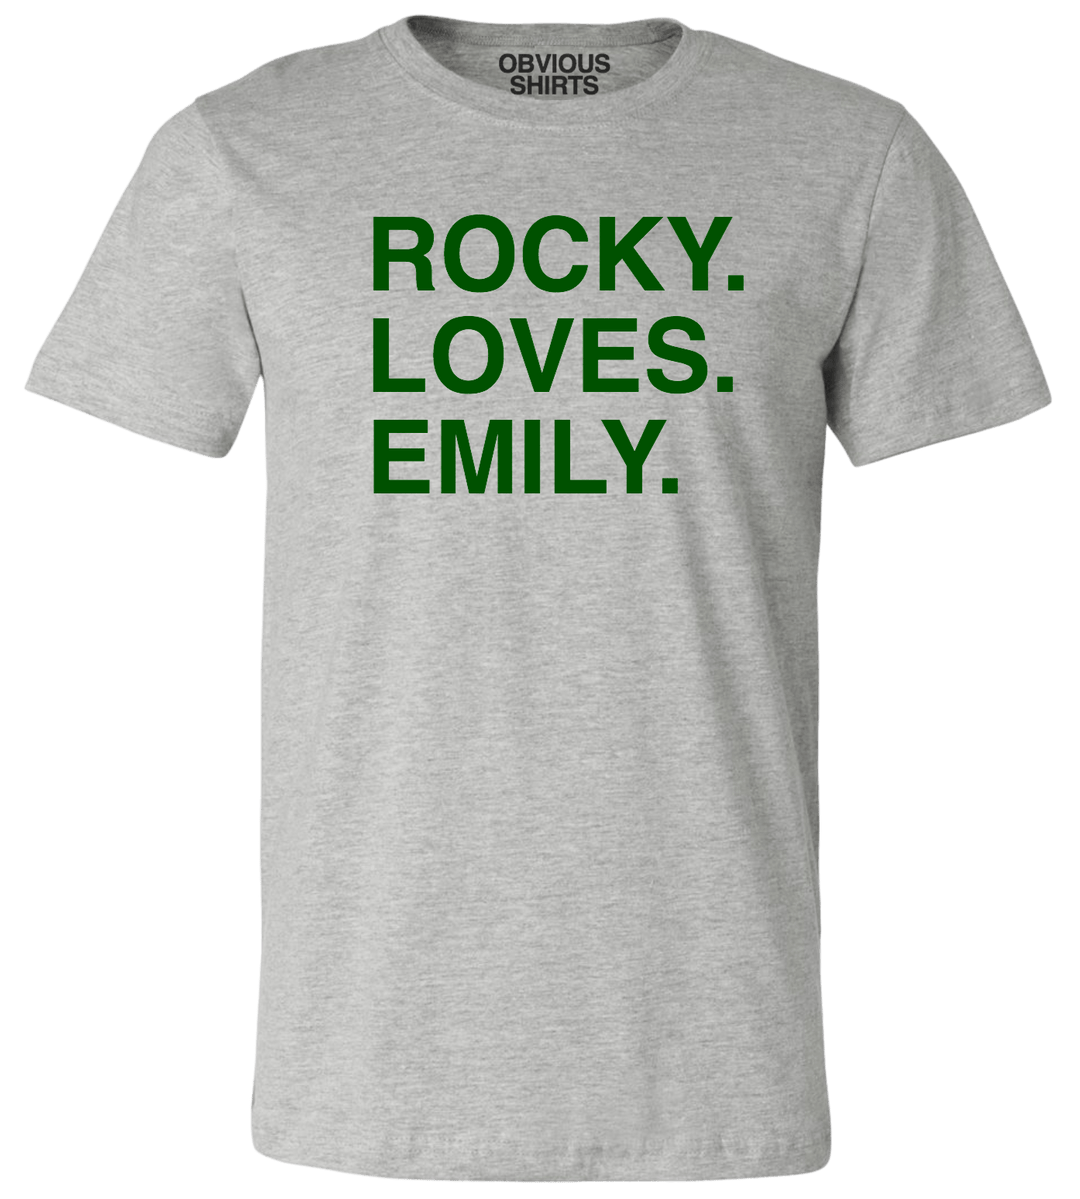 ROCKY. LOVES. EMILY. - OBVIOUS SHIRTS.